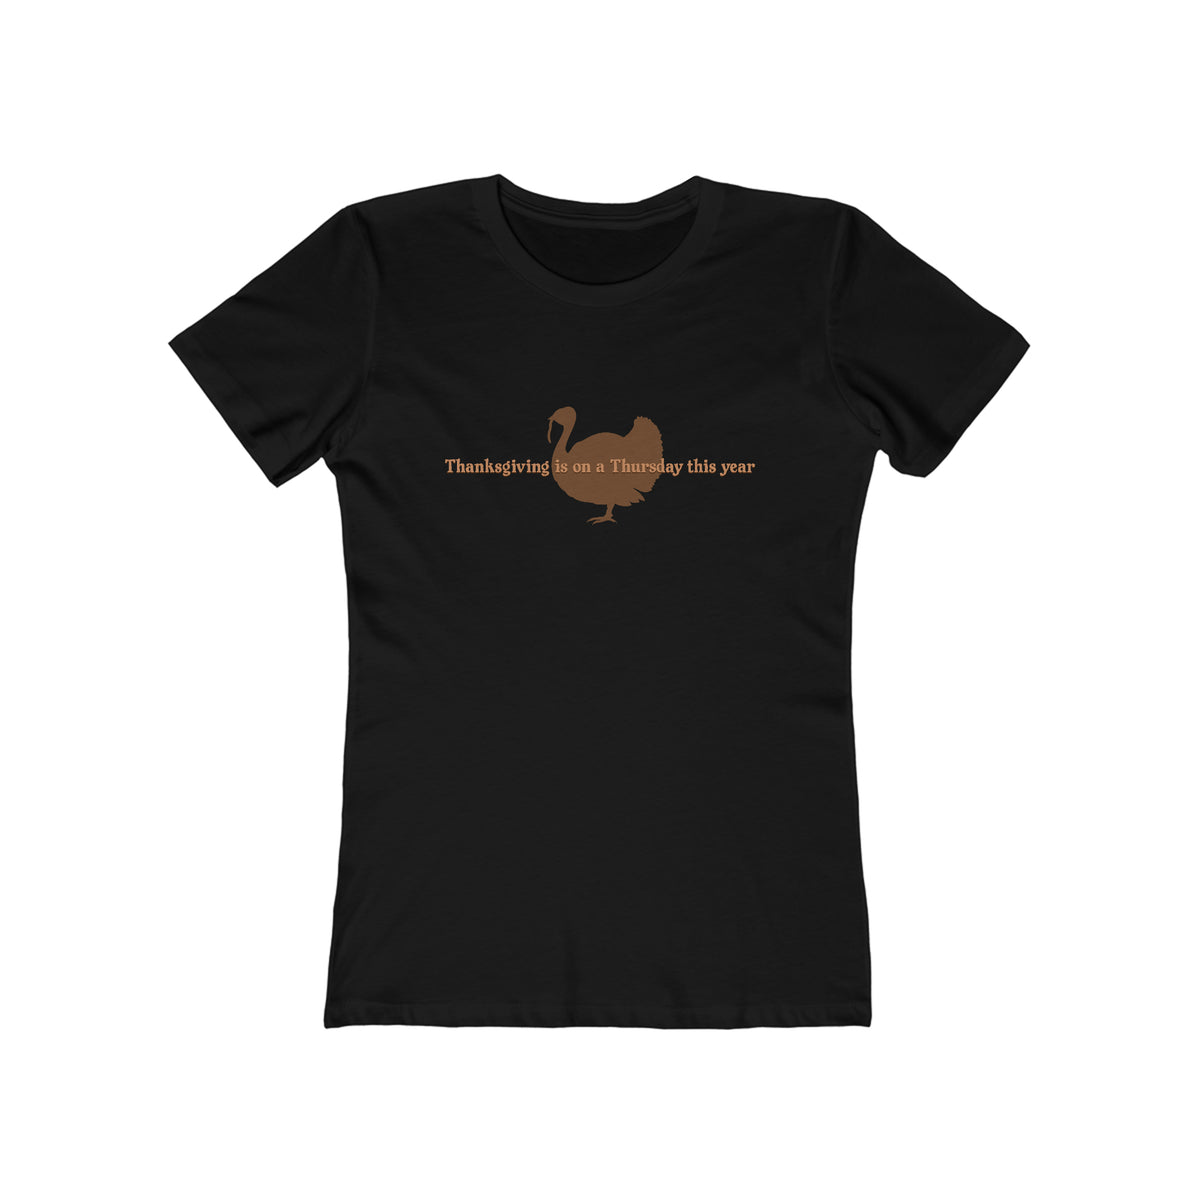 Thanksgiving Is On A Thursday This Year. - Women’s T-Shirt